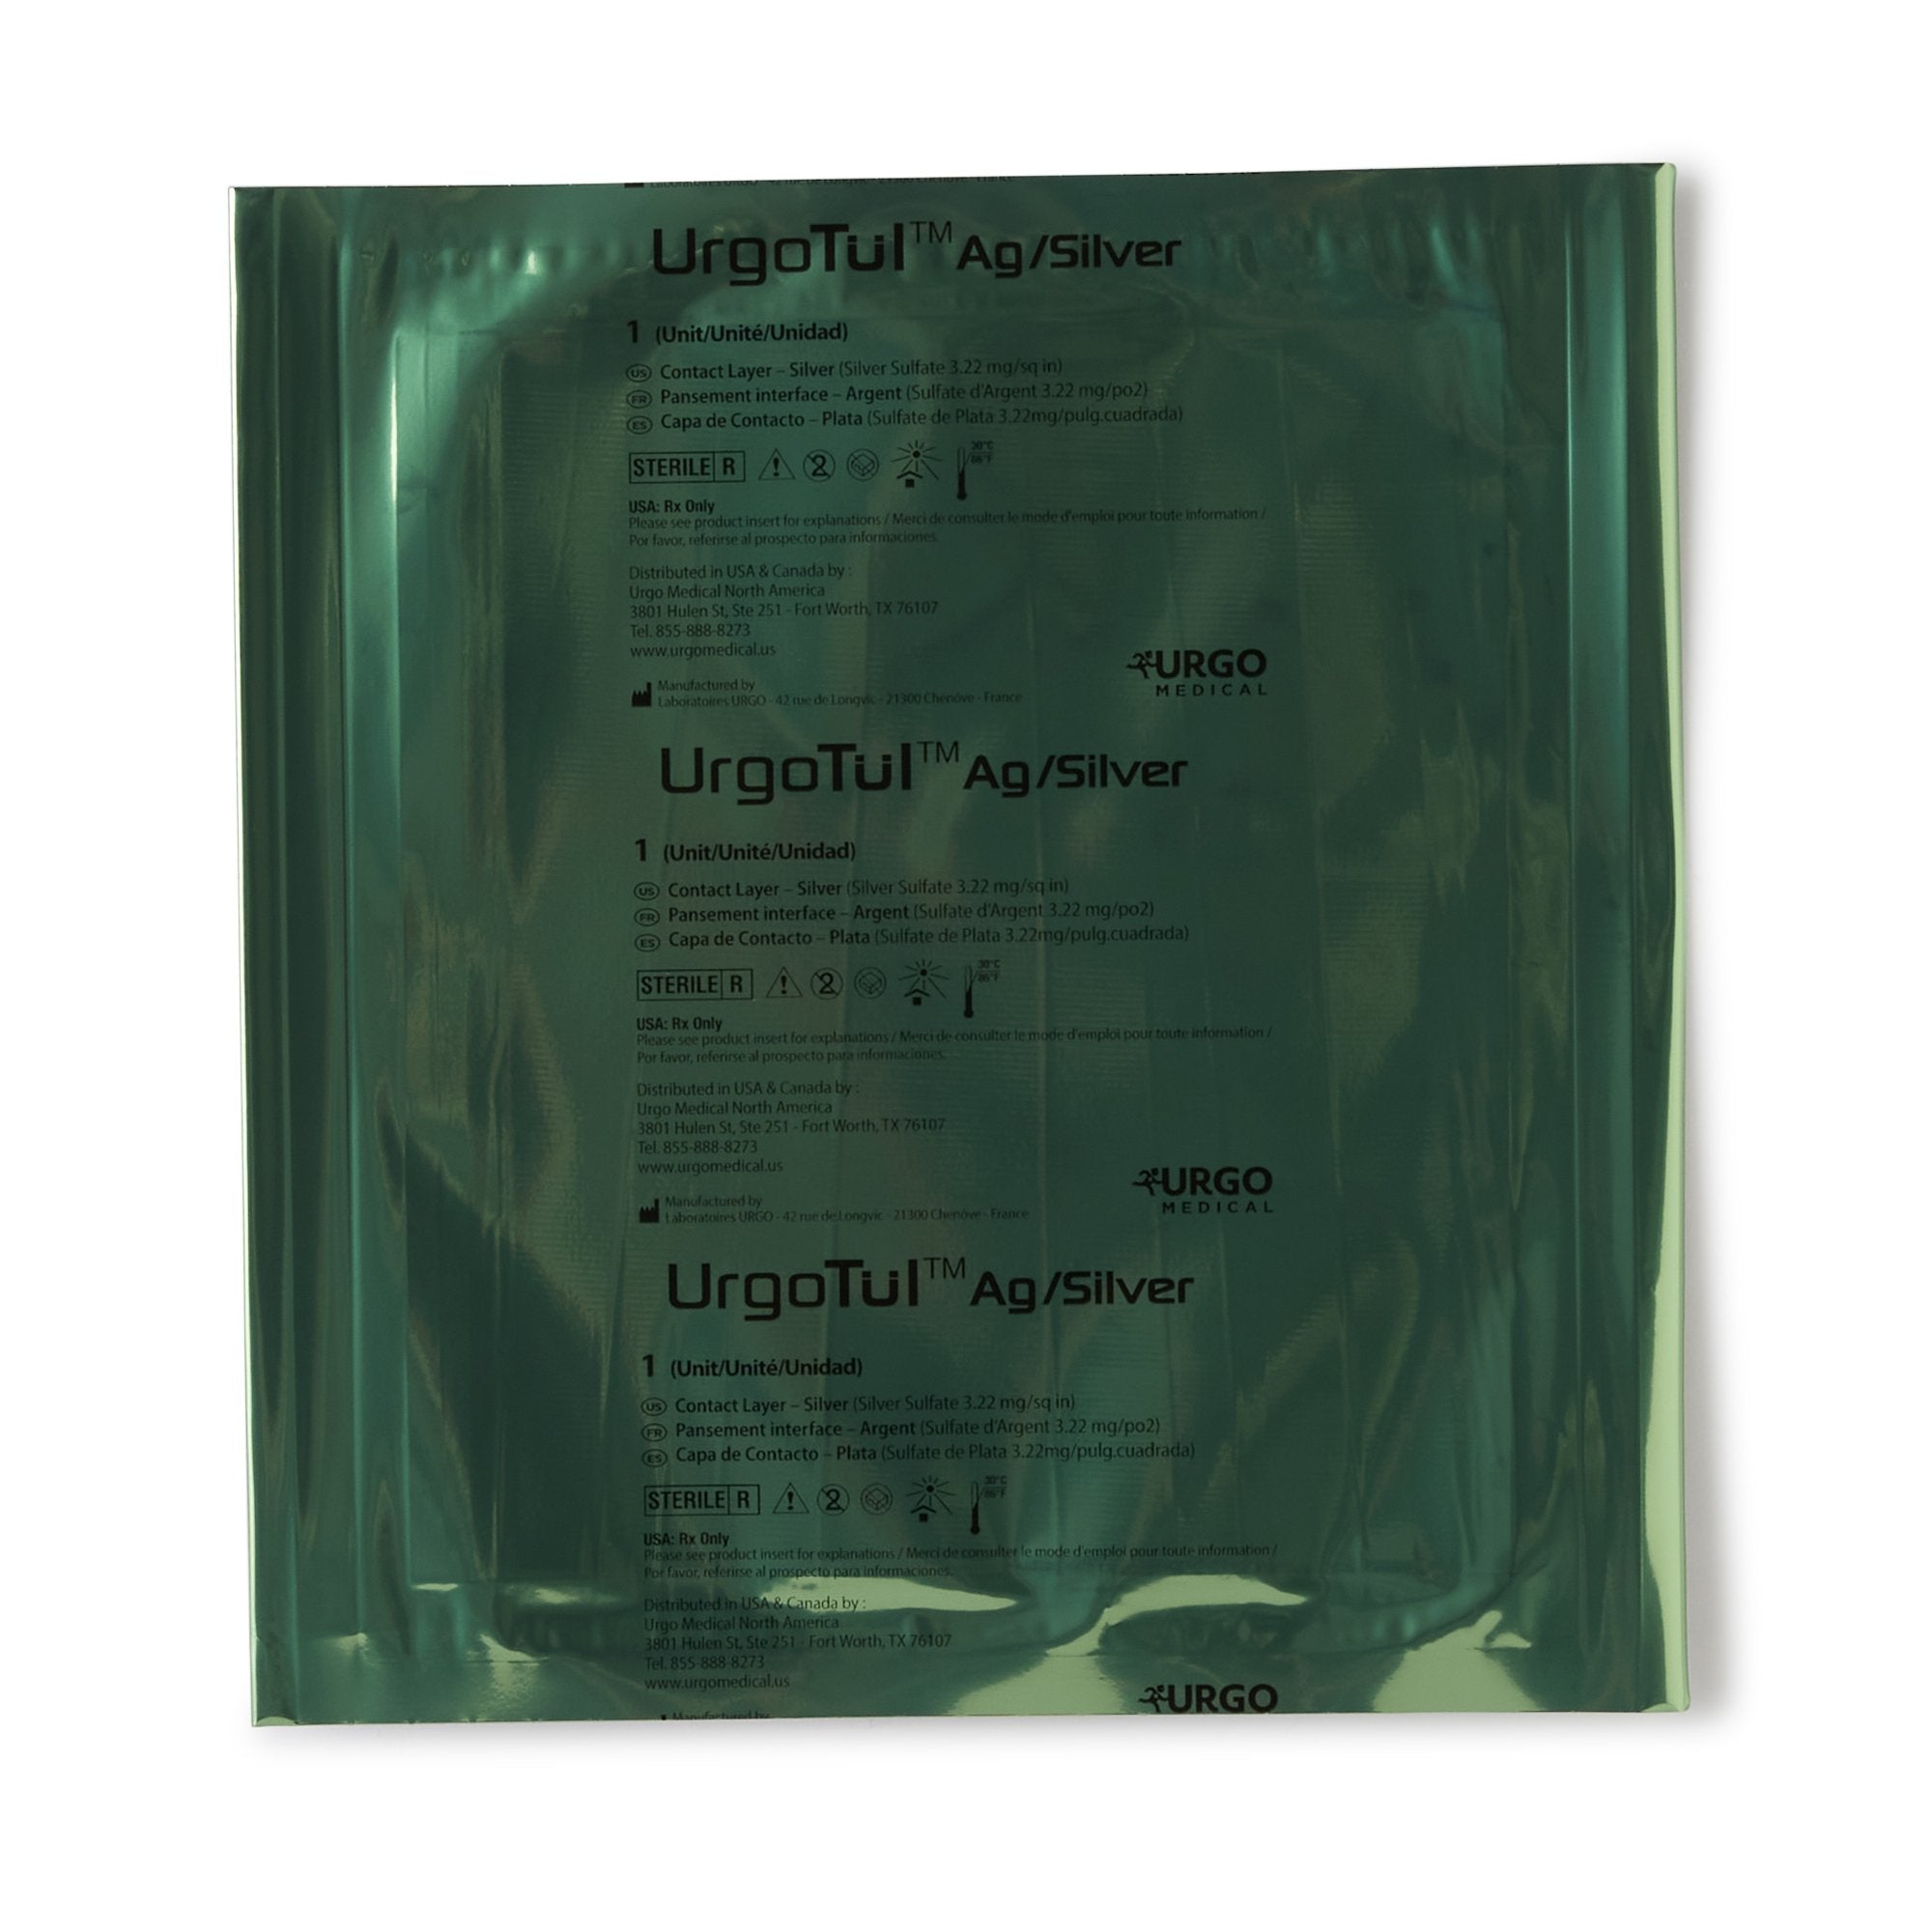 Silver Wound Contact Layer Dressing UrgoTul™AG/Silver 6 X 8 Inch Rectangle Sterile